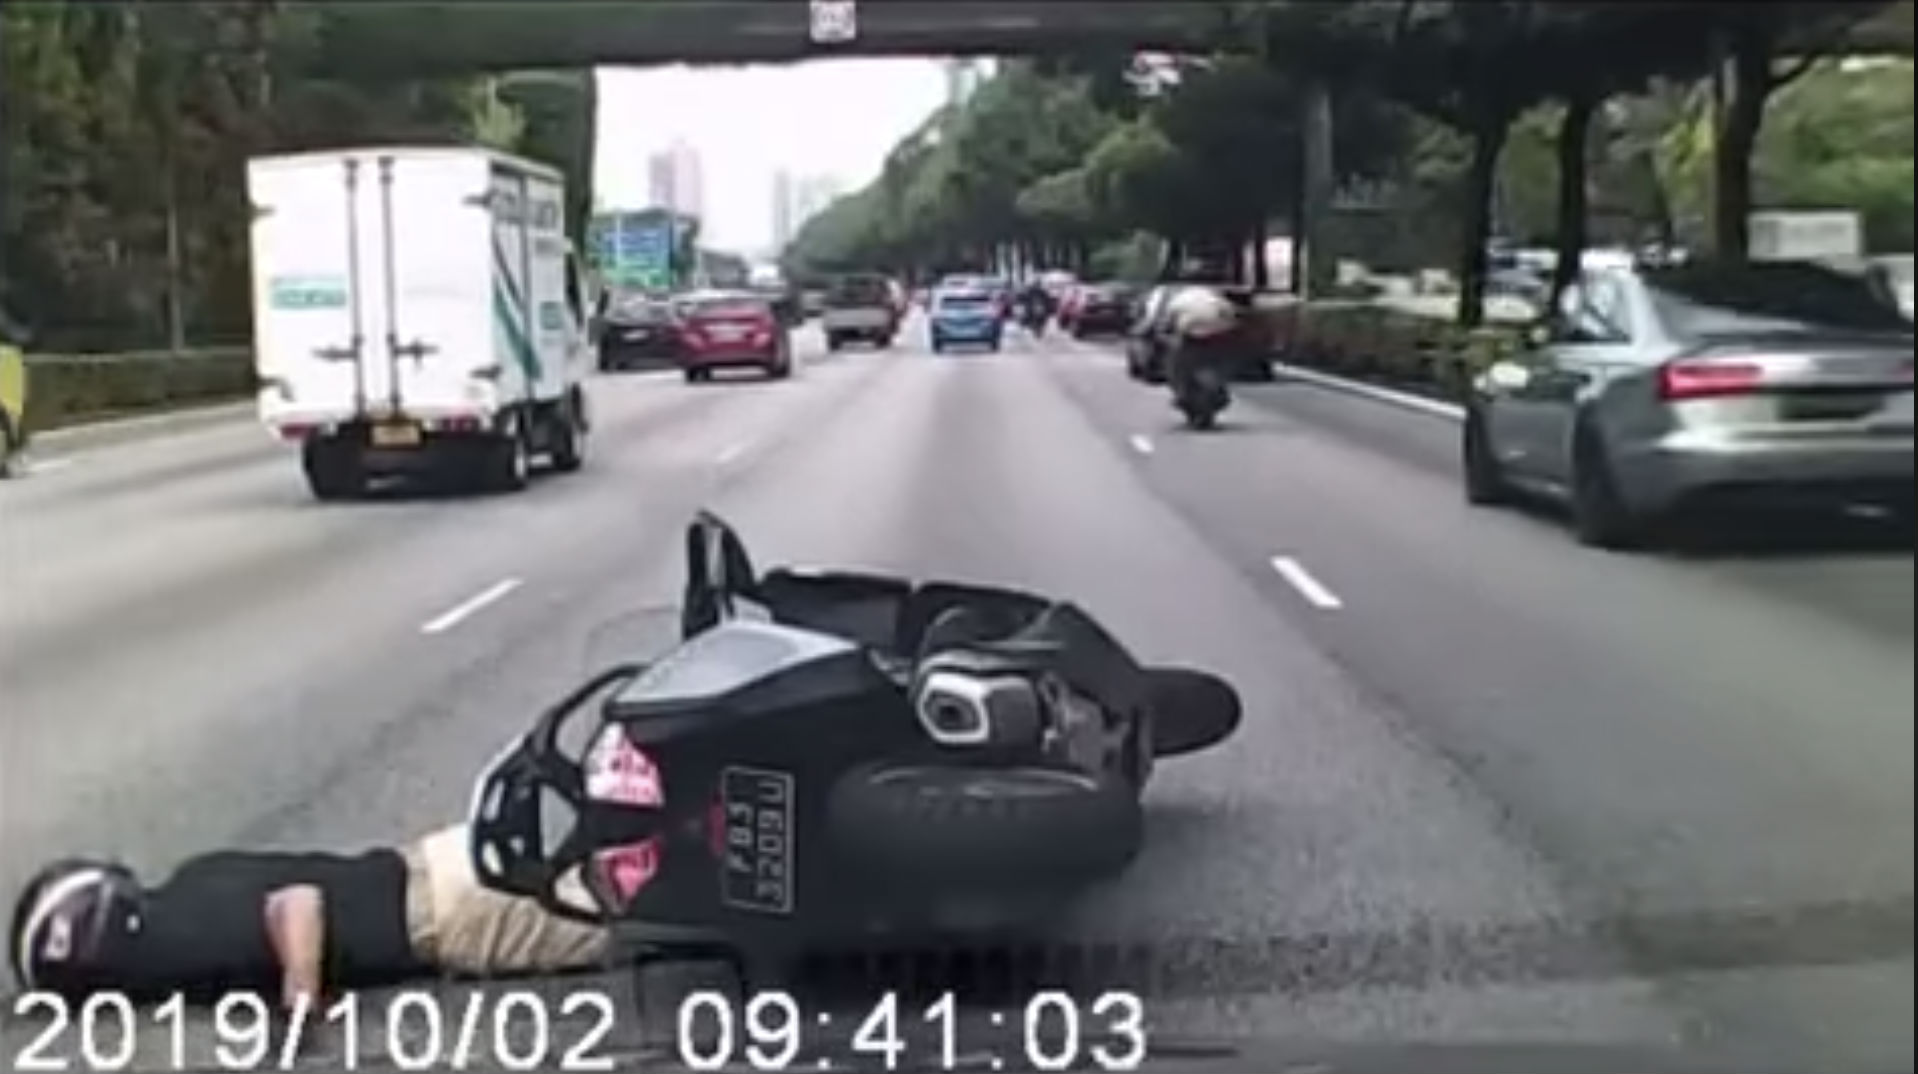 Screenshot taken from All Singapore Stuff’s video showing the motorcyclist on the ground after the accident. All Singapore Stuff/Facebook